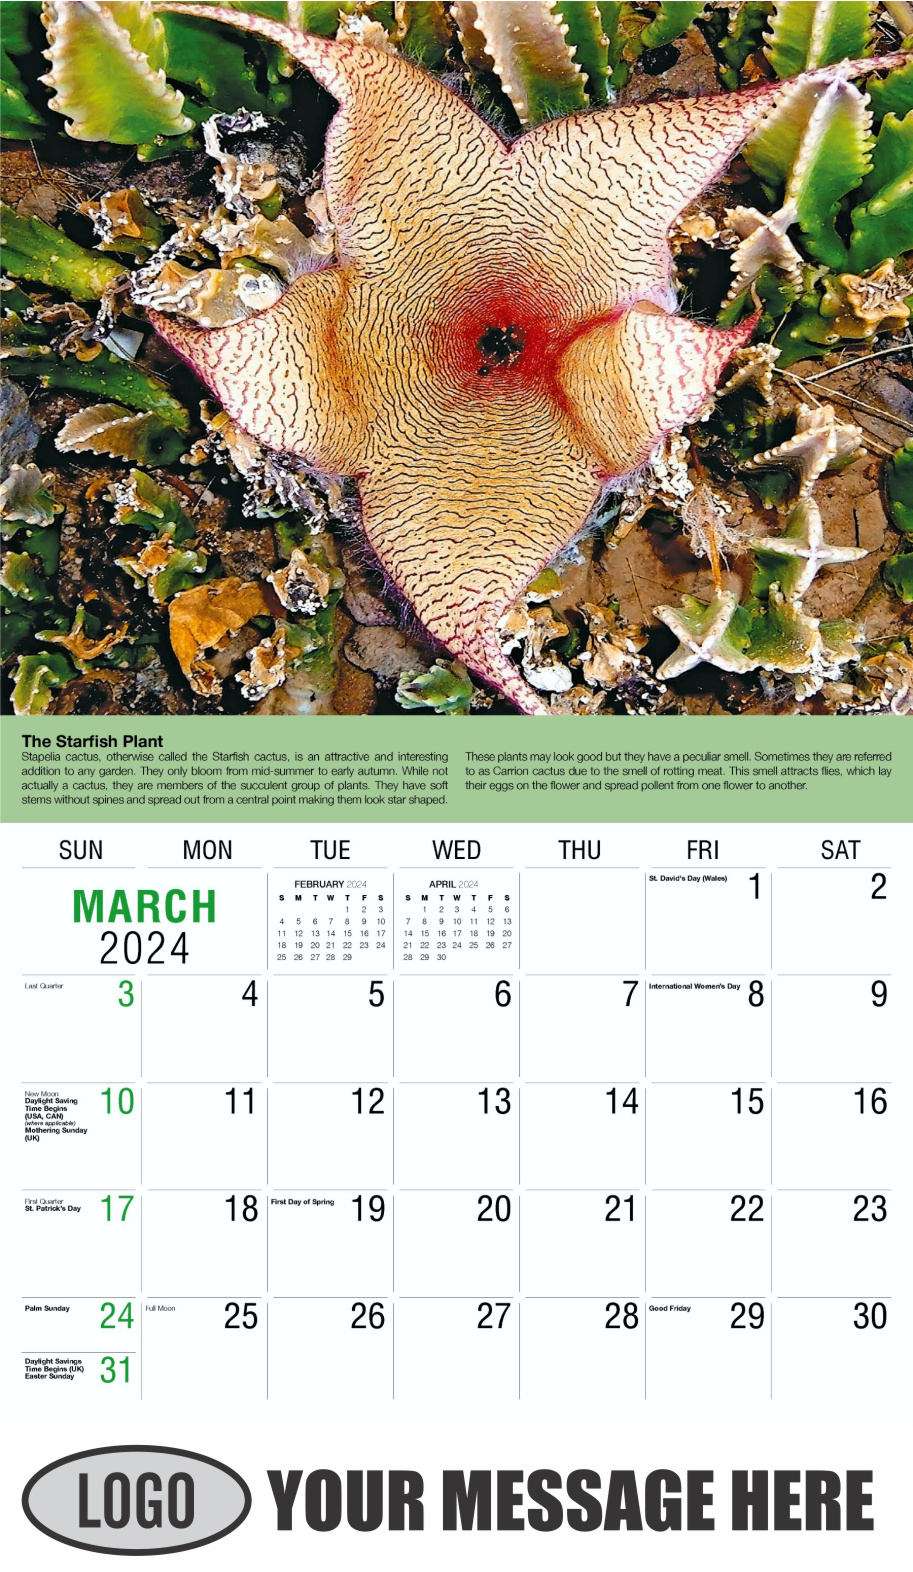 Planet Earth 2024 Business Promotional Wall Calendar - March